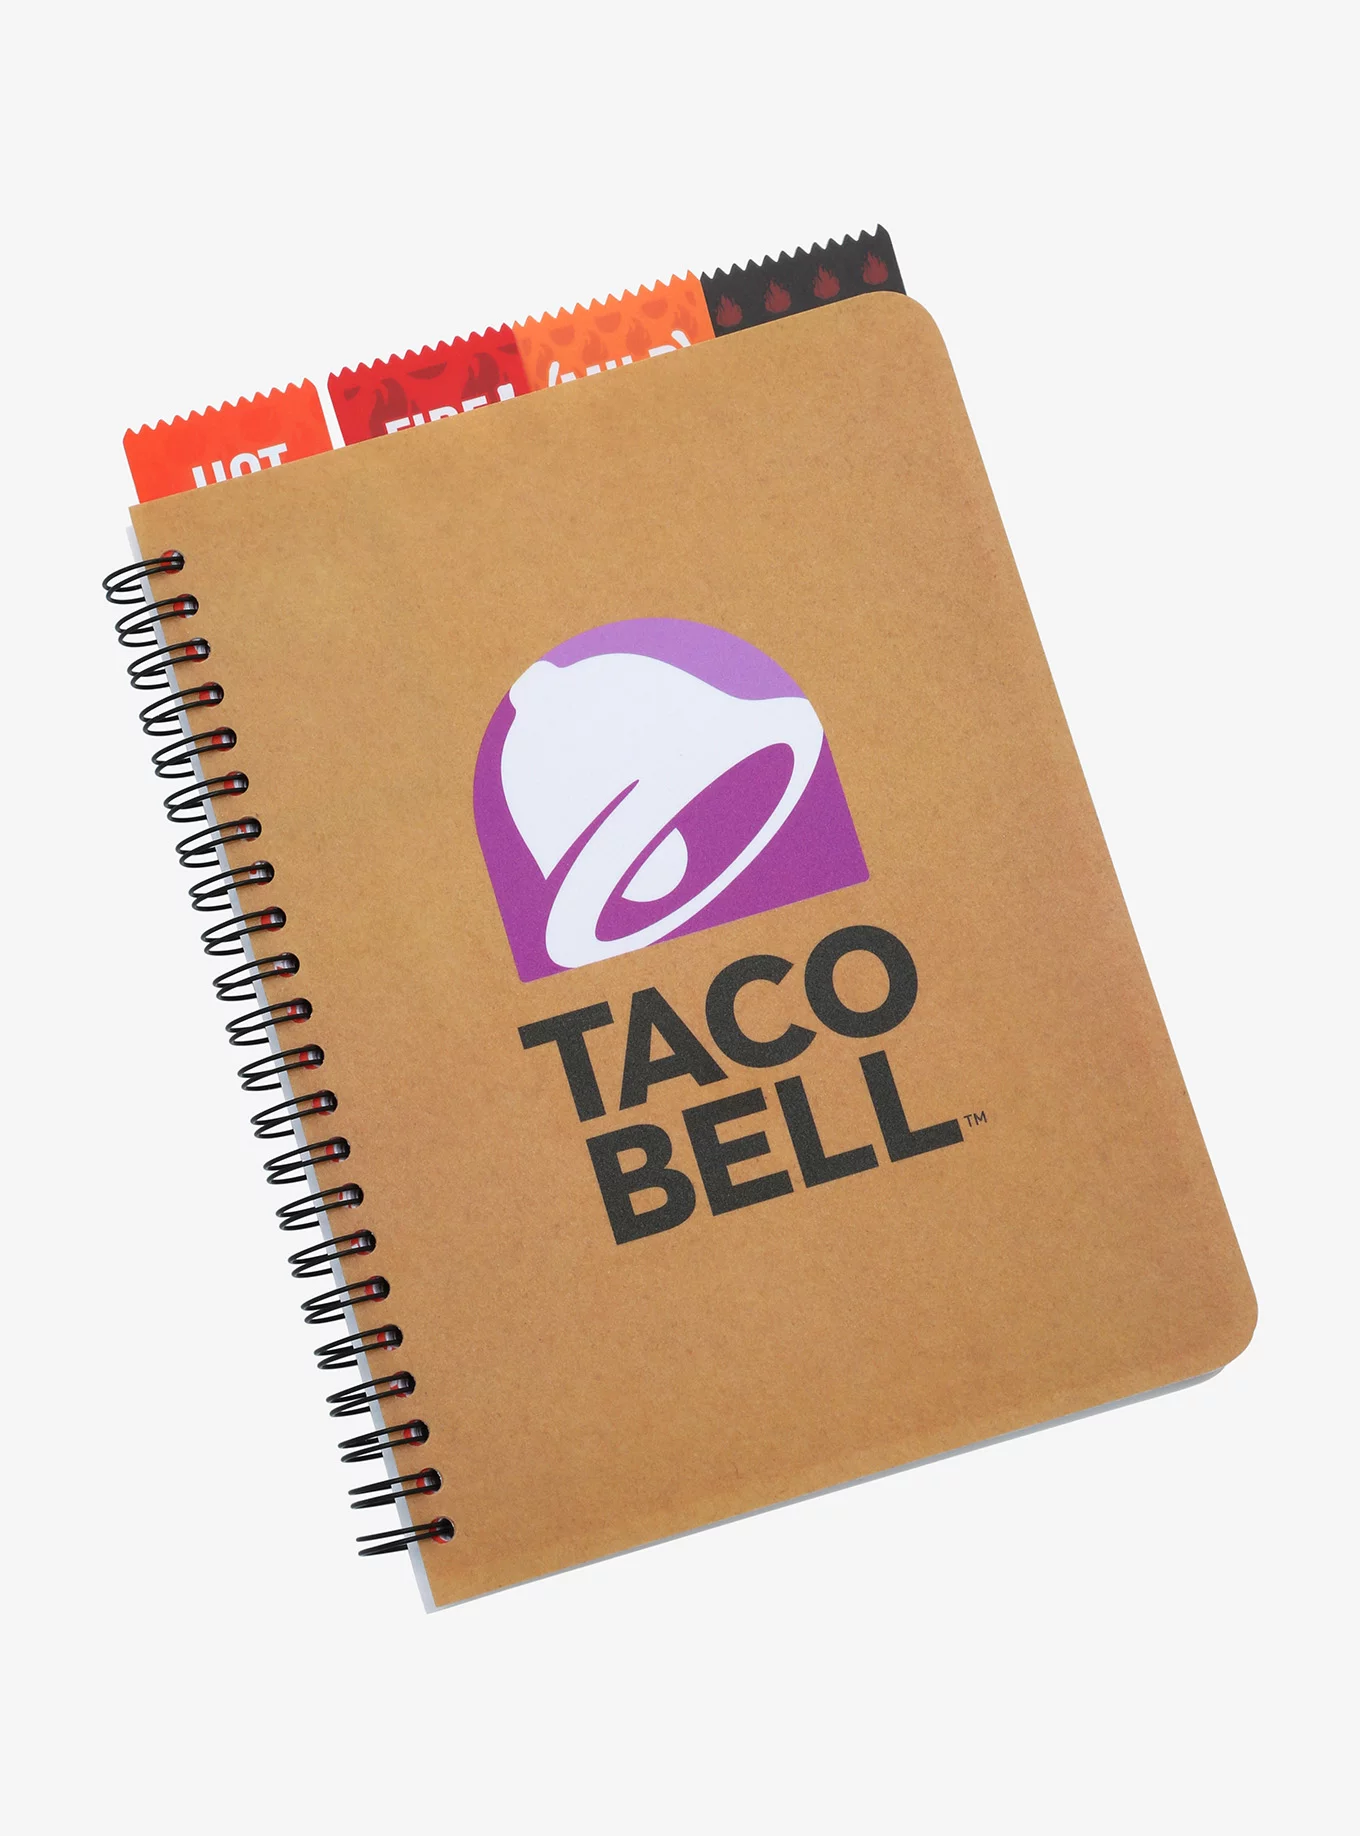 notebook with cardboard like cover that says taco bell with logo and hot sauce packet tabs poking out the top